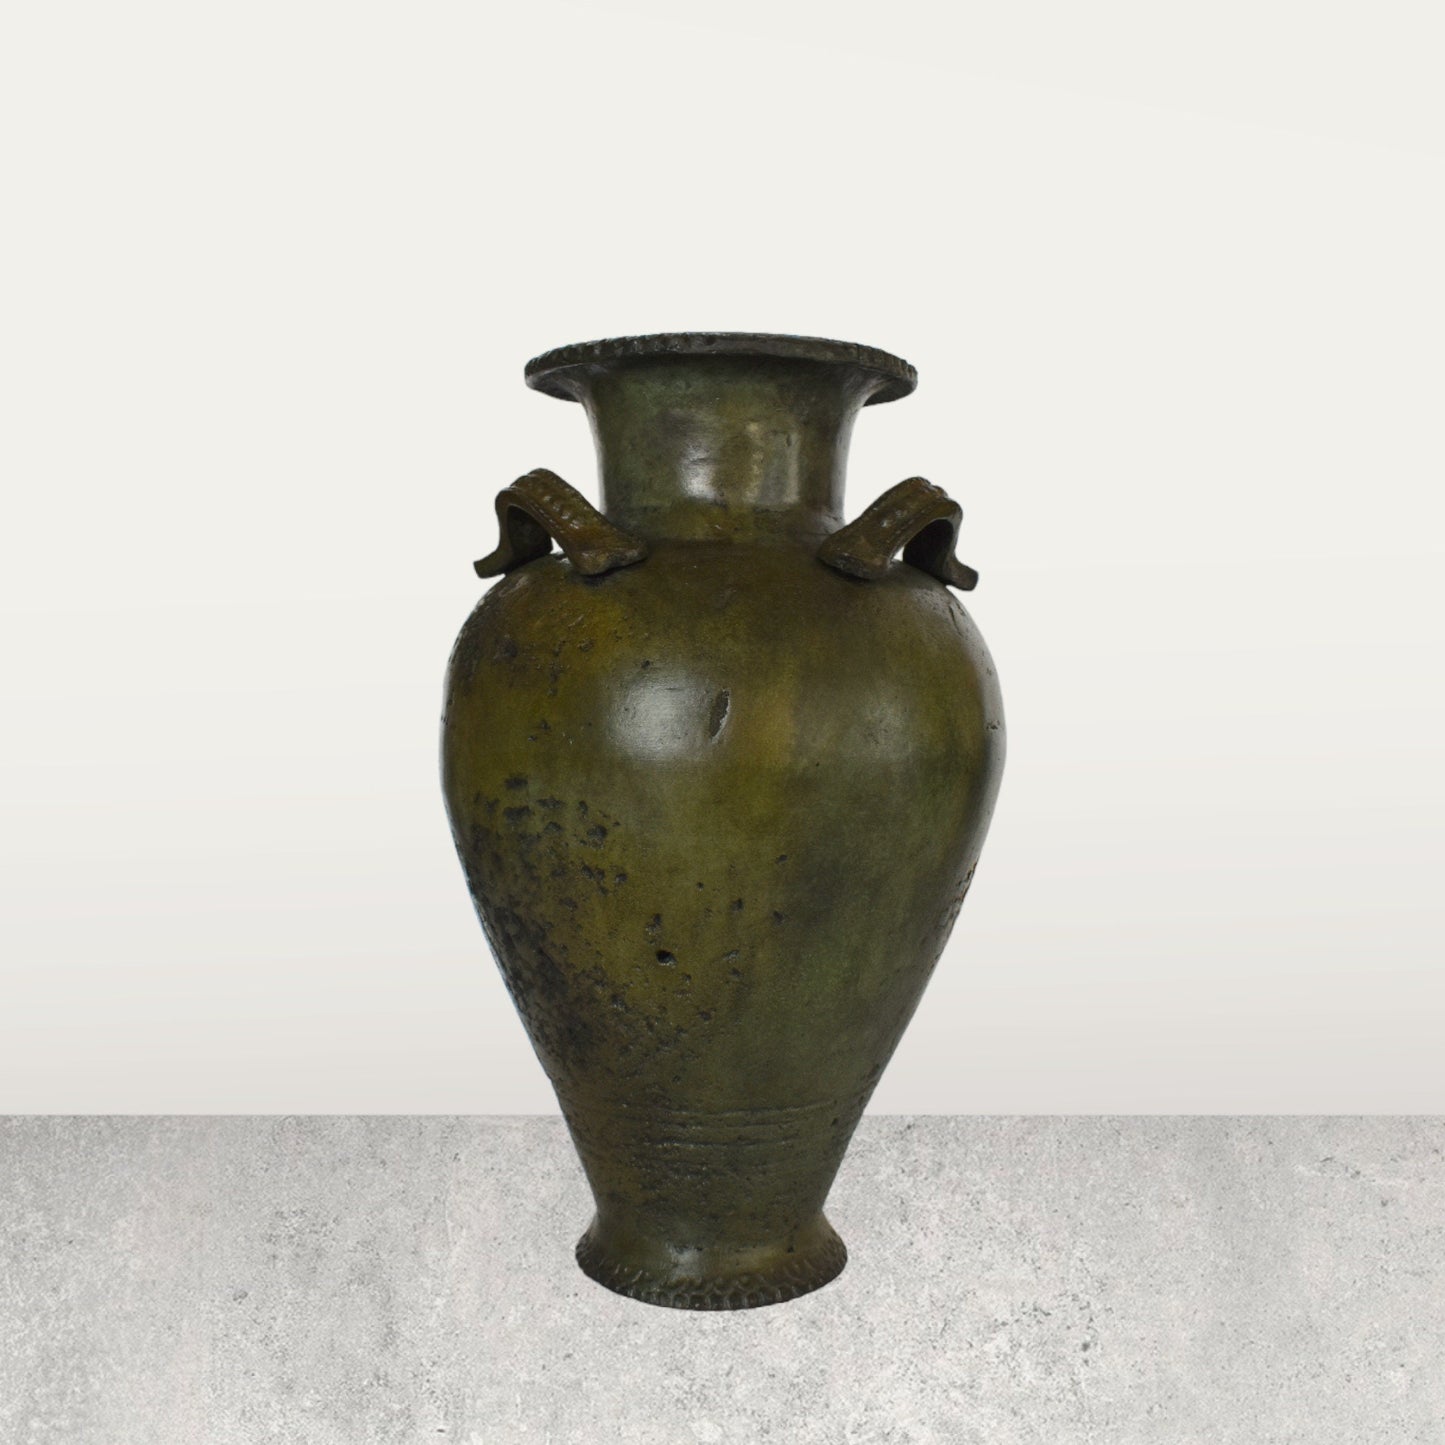 Hydria - Type of water-carrying vessel - A prize in tournaments and competitions - 700-300 BC - Pure Bronze Statue